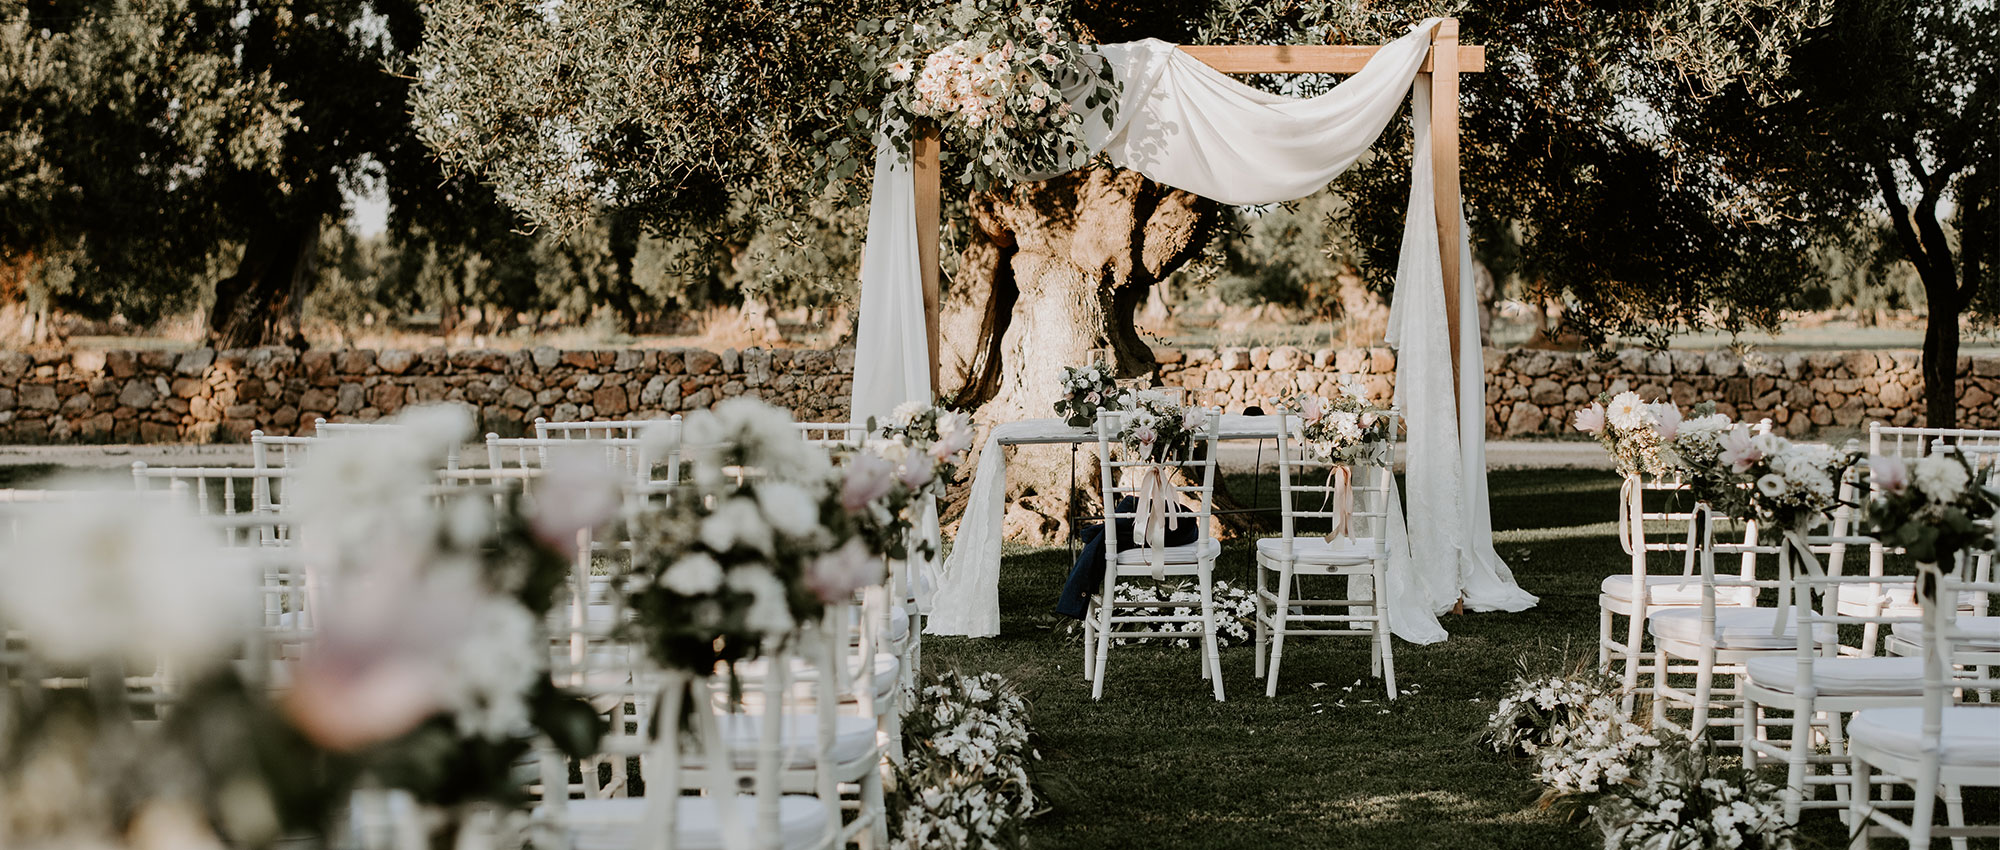 glamour wedding in italy